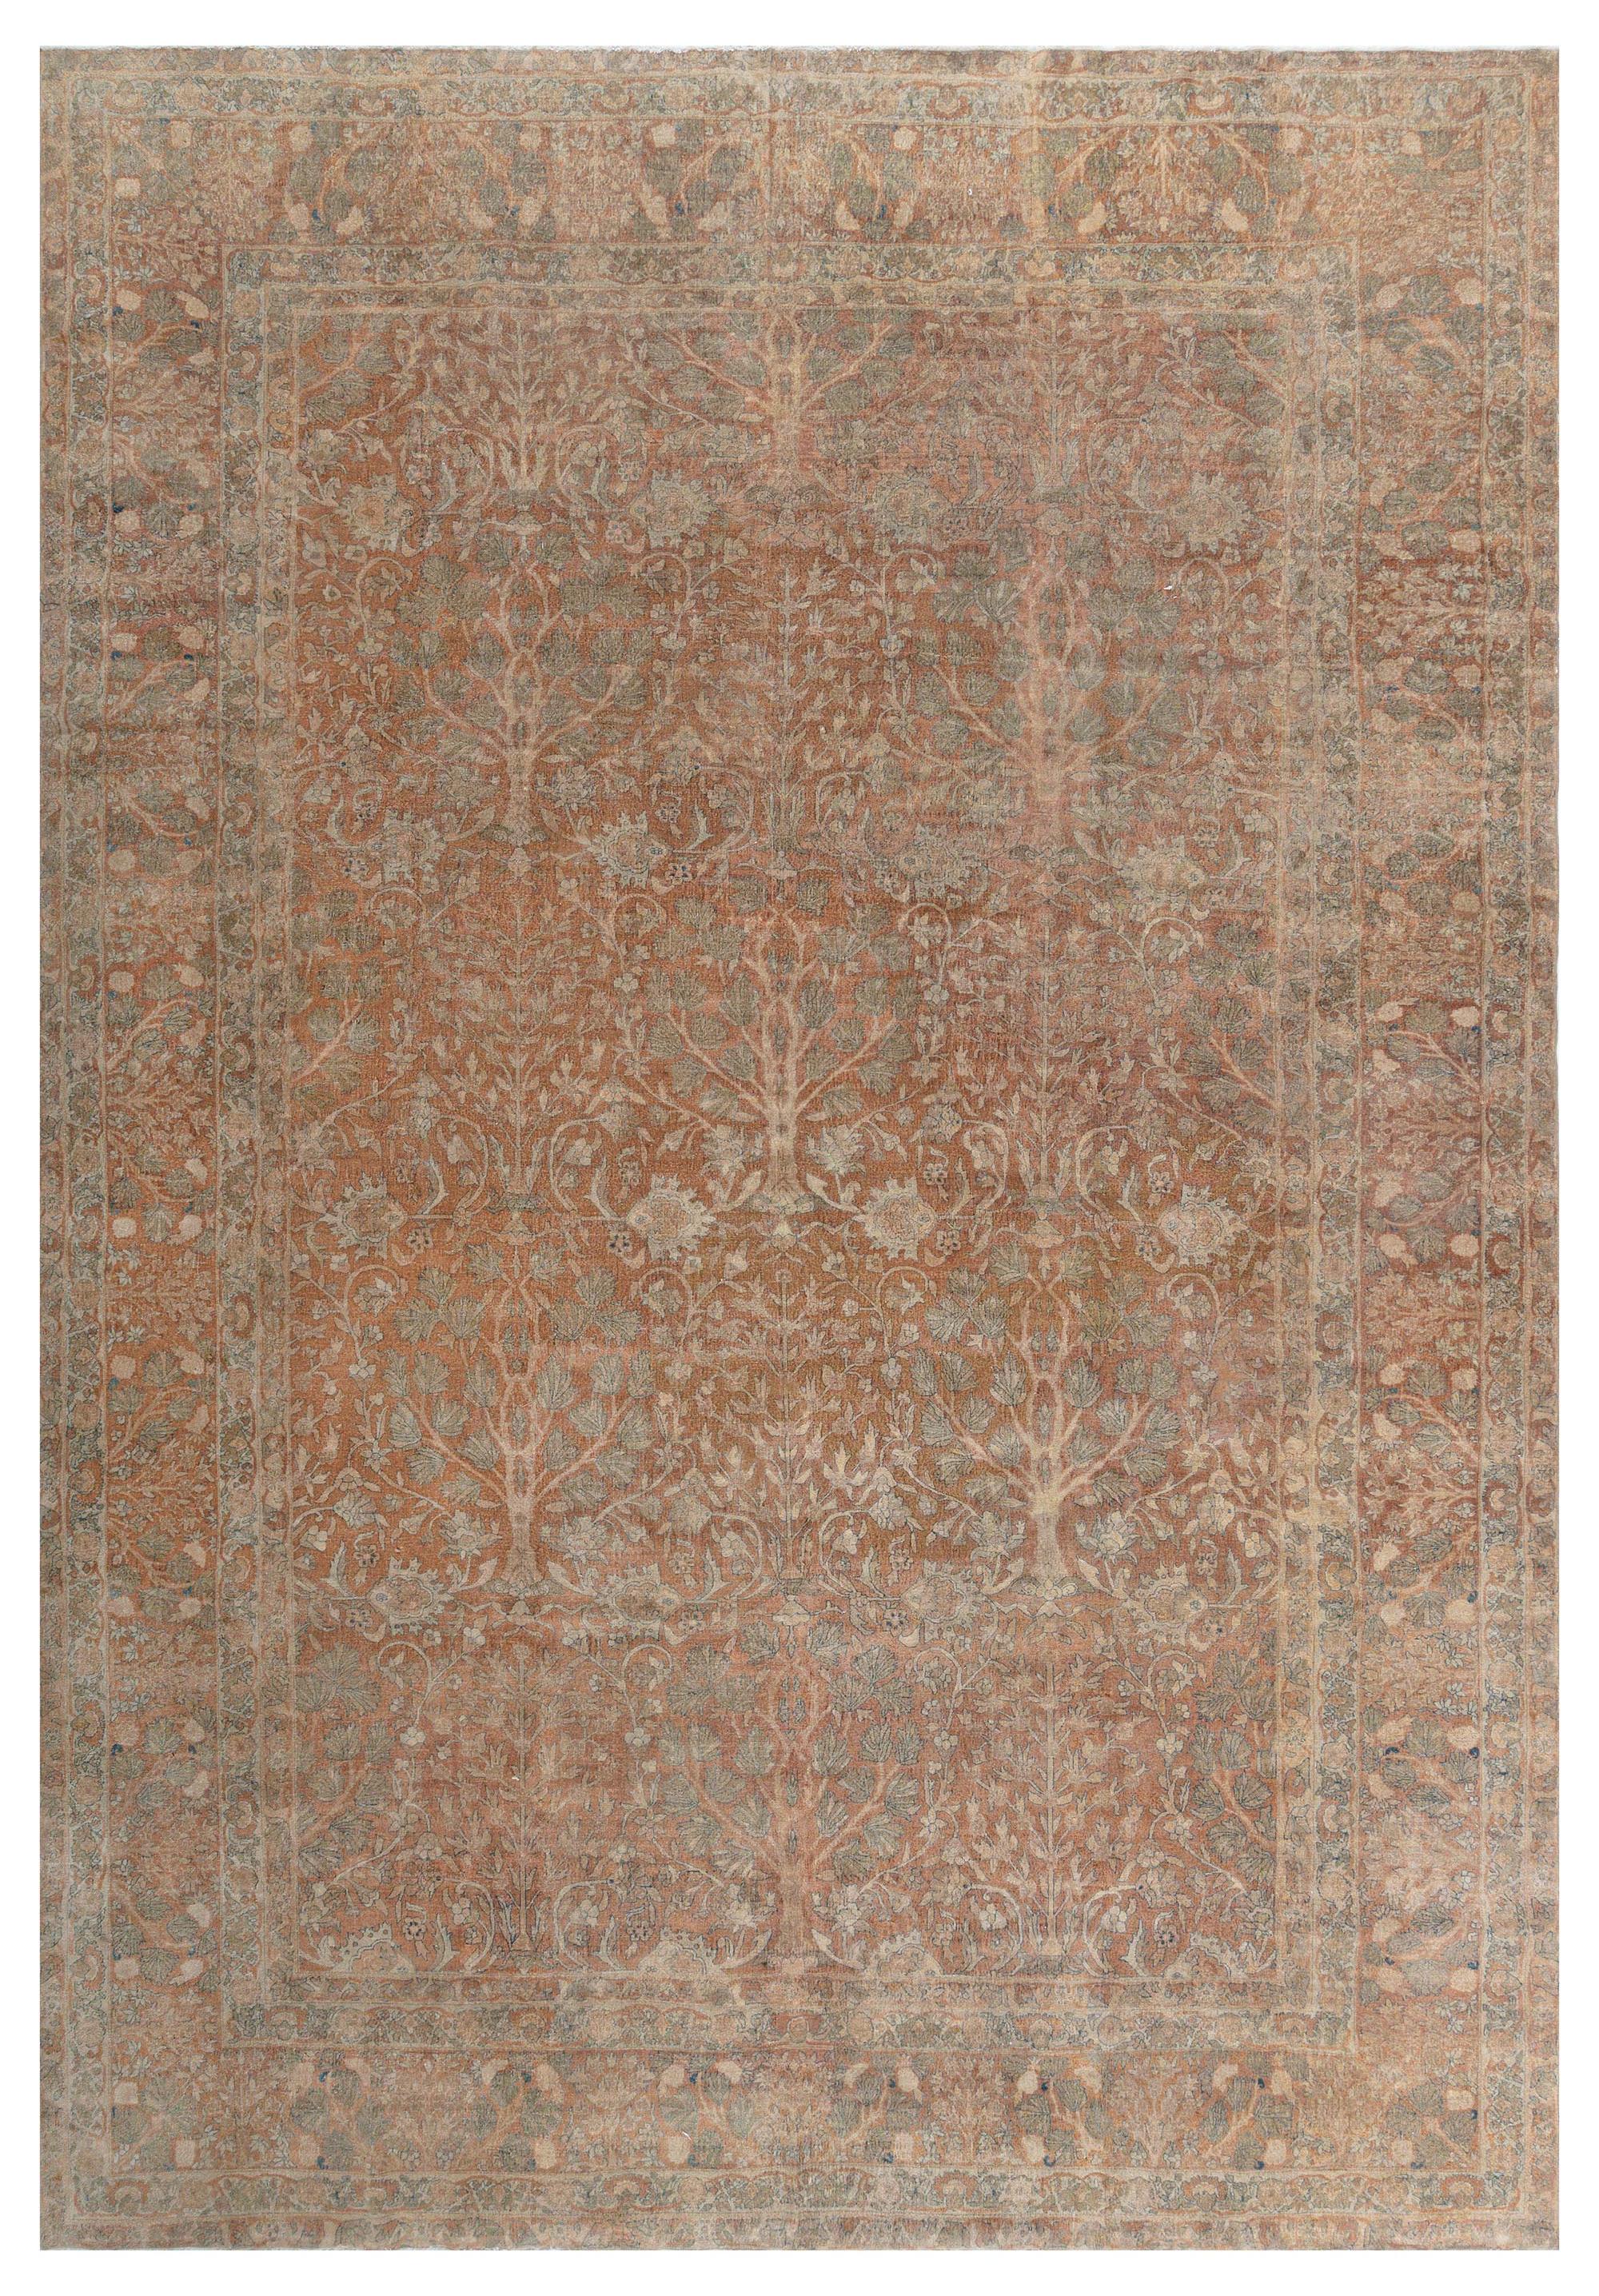 Antique Indian Brown Handmade Wool Rug For Sale